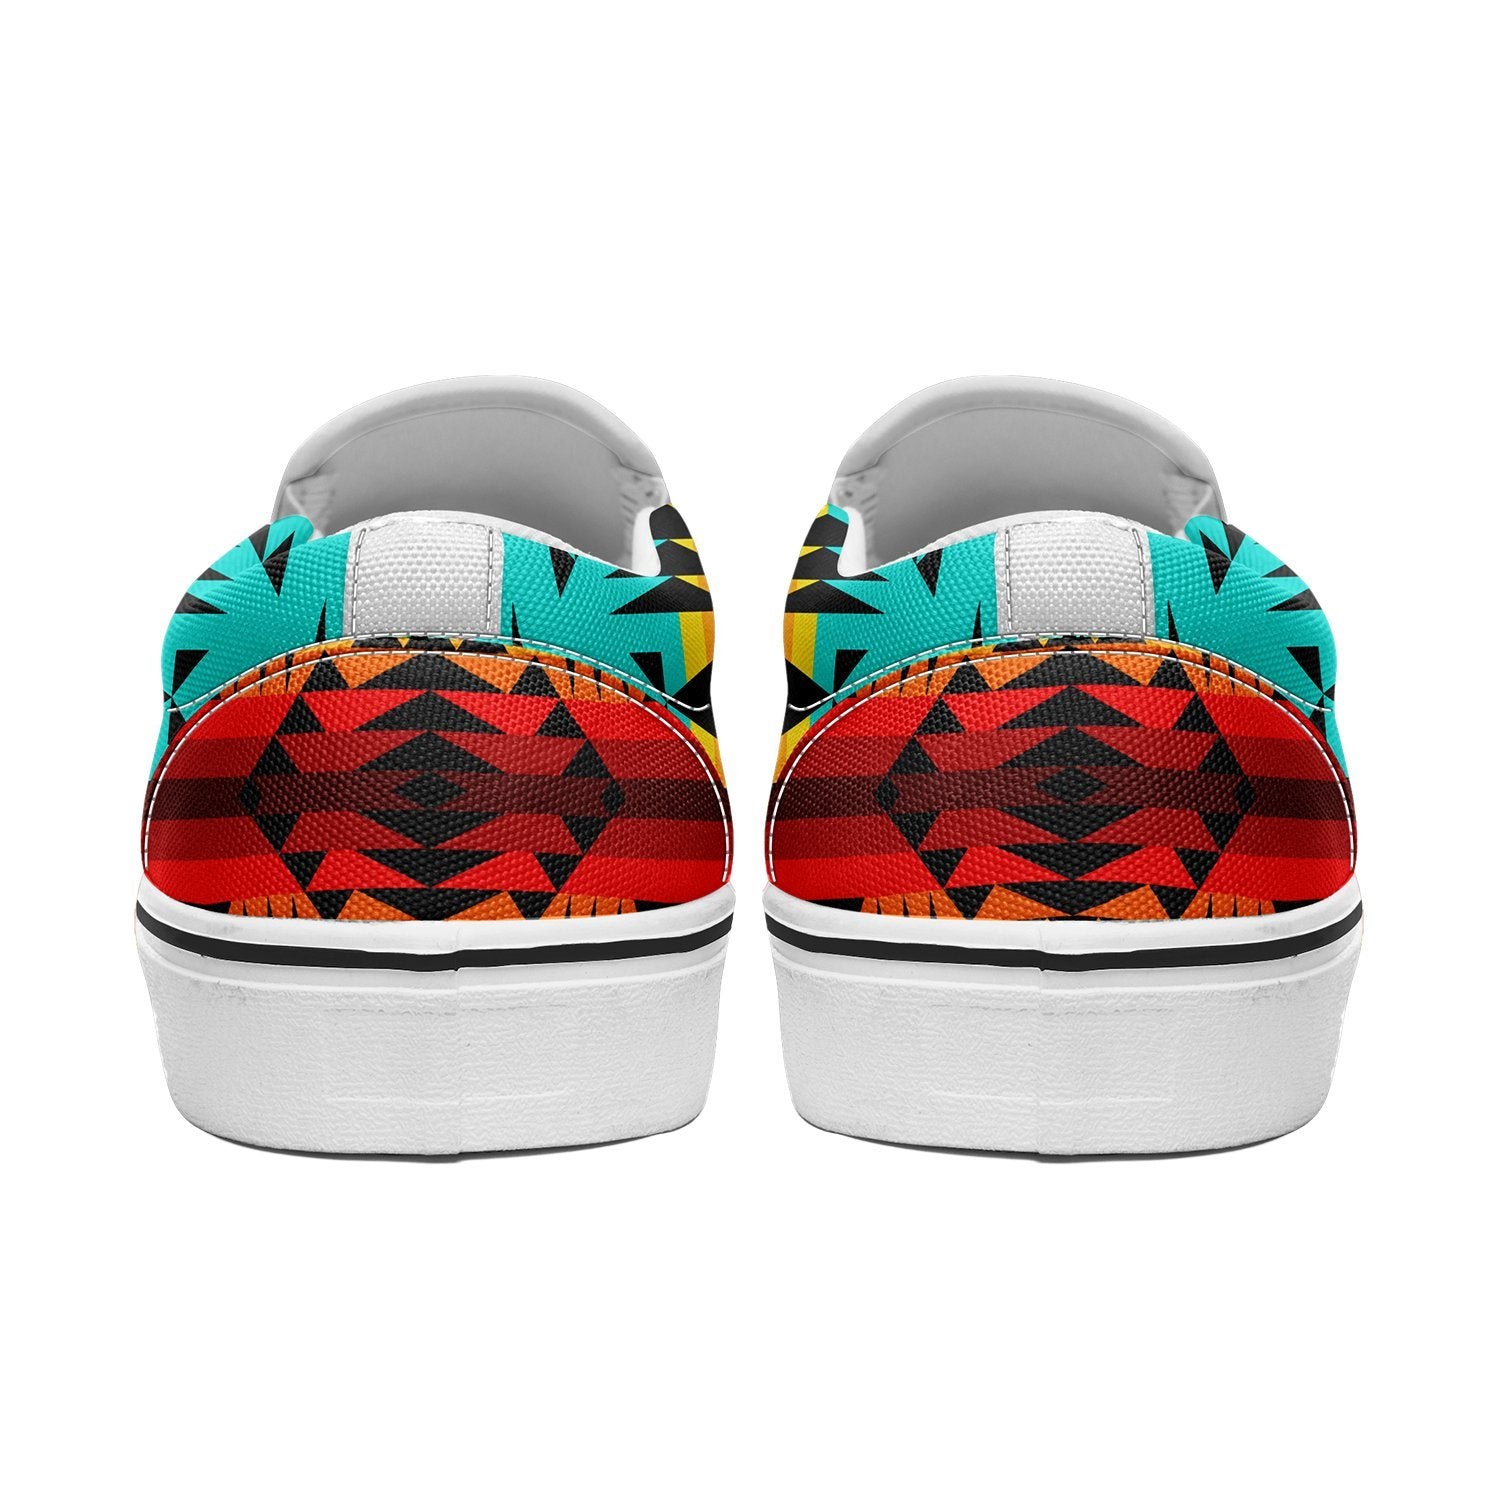 Between the Mountains Otoyimm Canvas Slip On Shoes 49 Dzine 